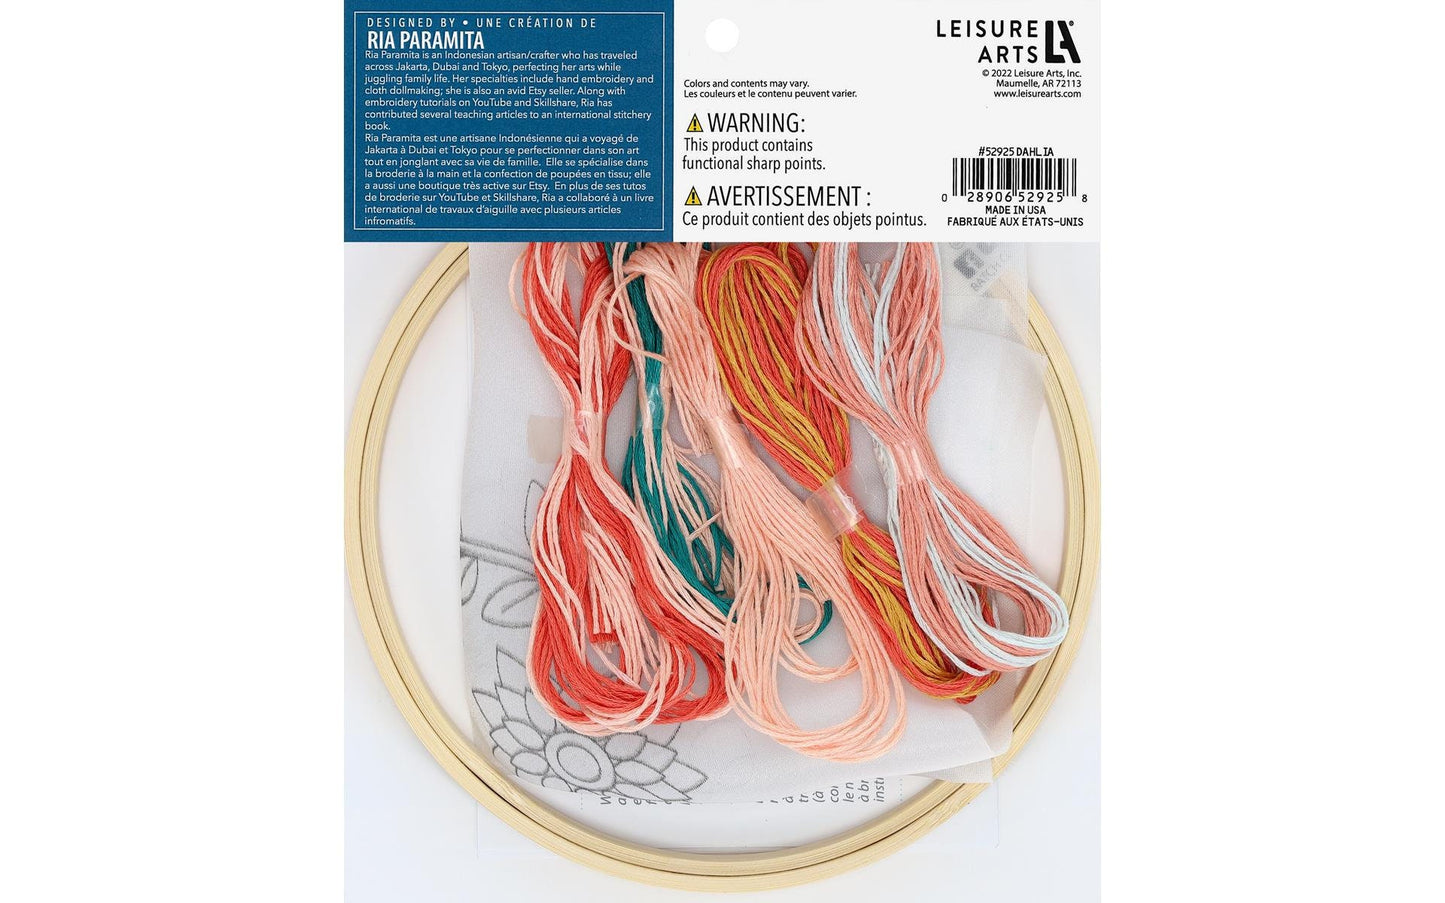 Dahlia Embroidery Kit on preprinted Organza by Liesure Arts finished size 6 inches